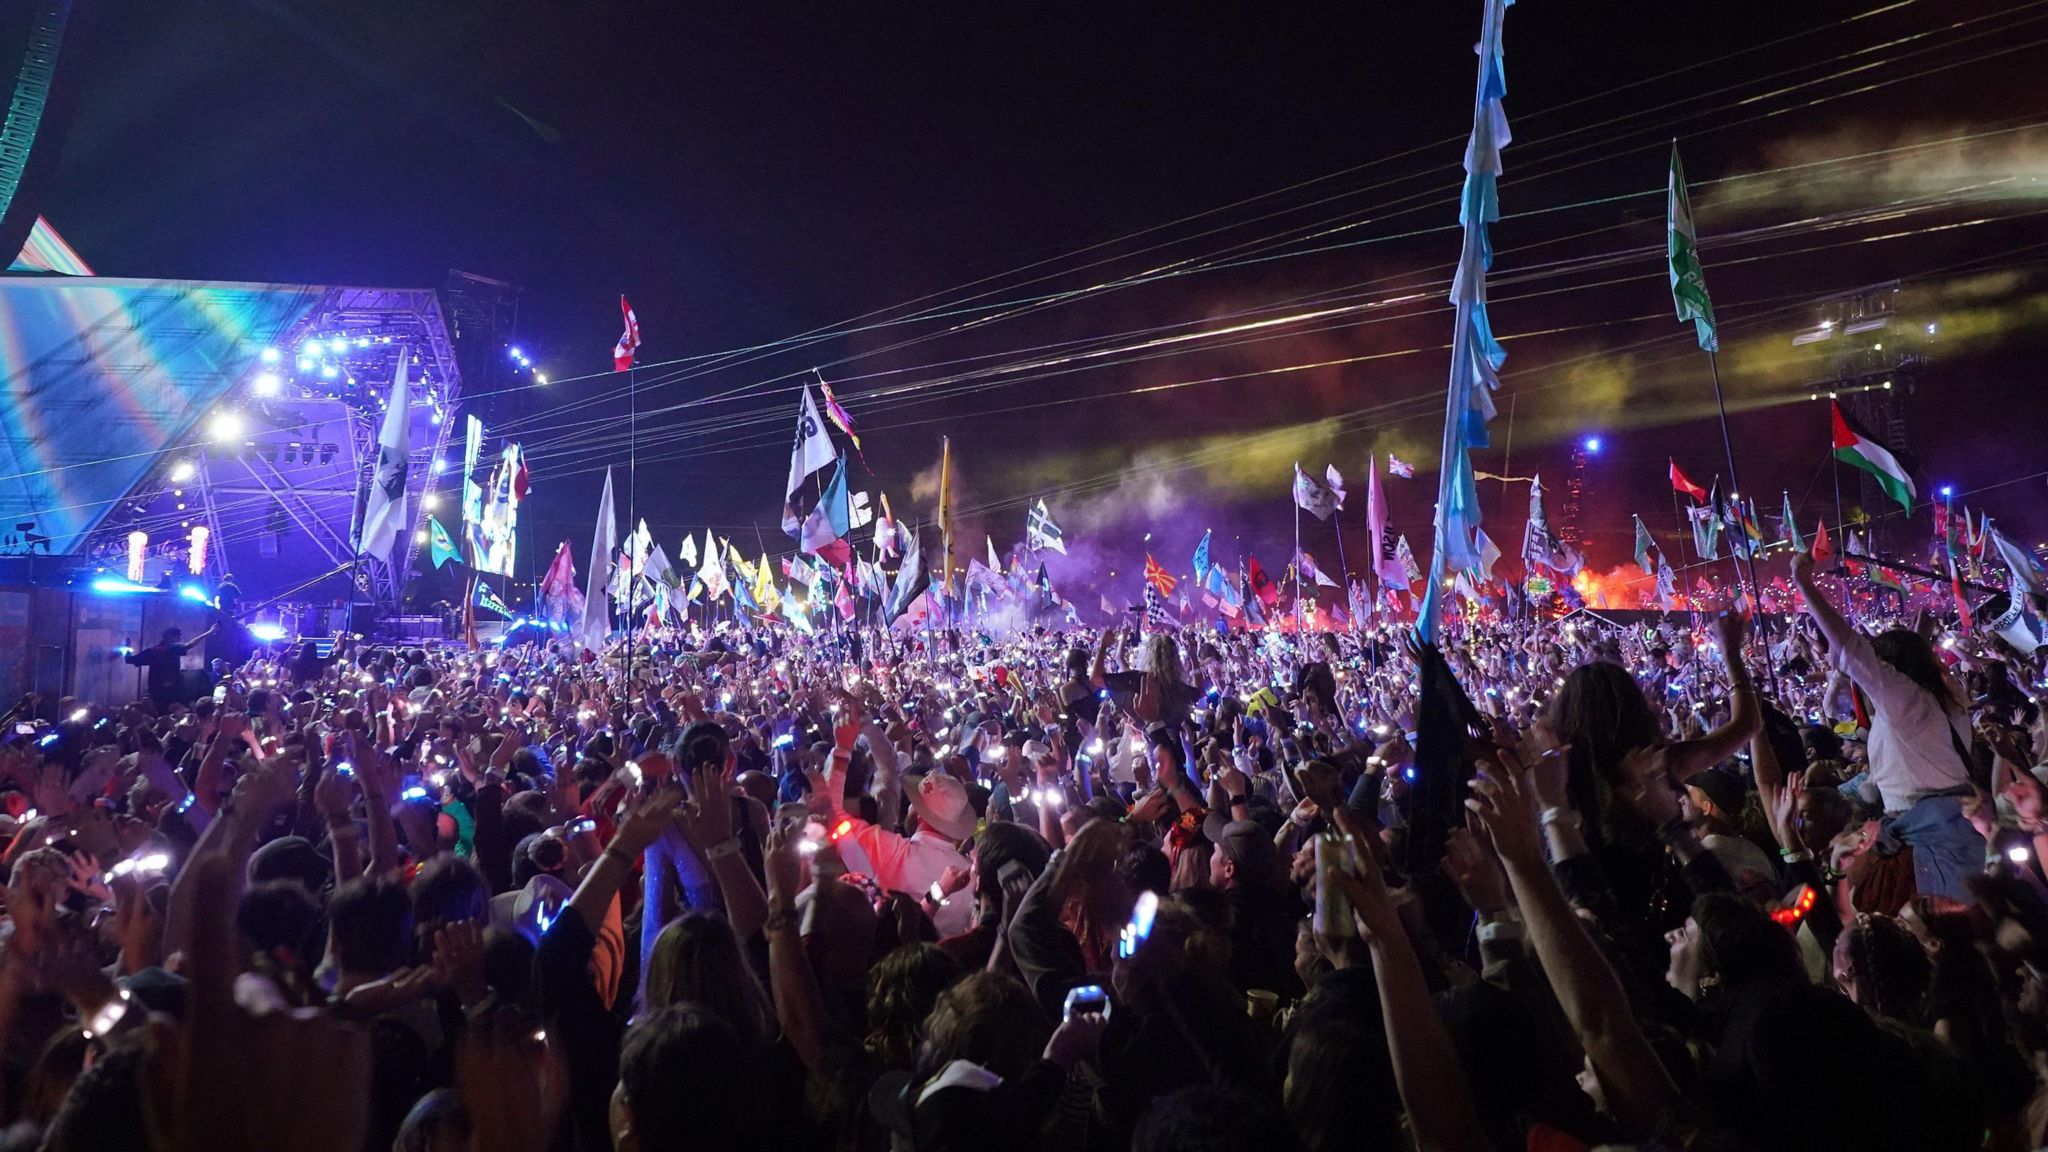 Huge crowd watches Coldplay's performance at Glastonbury 